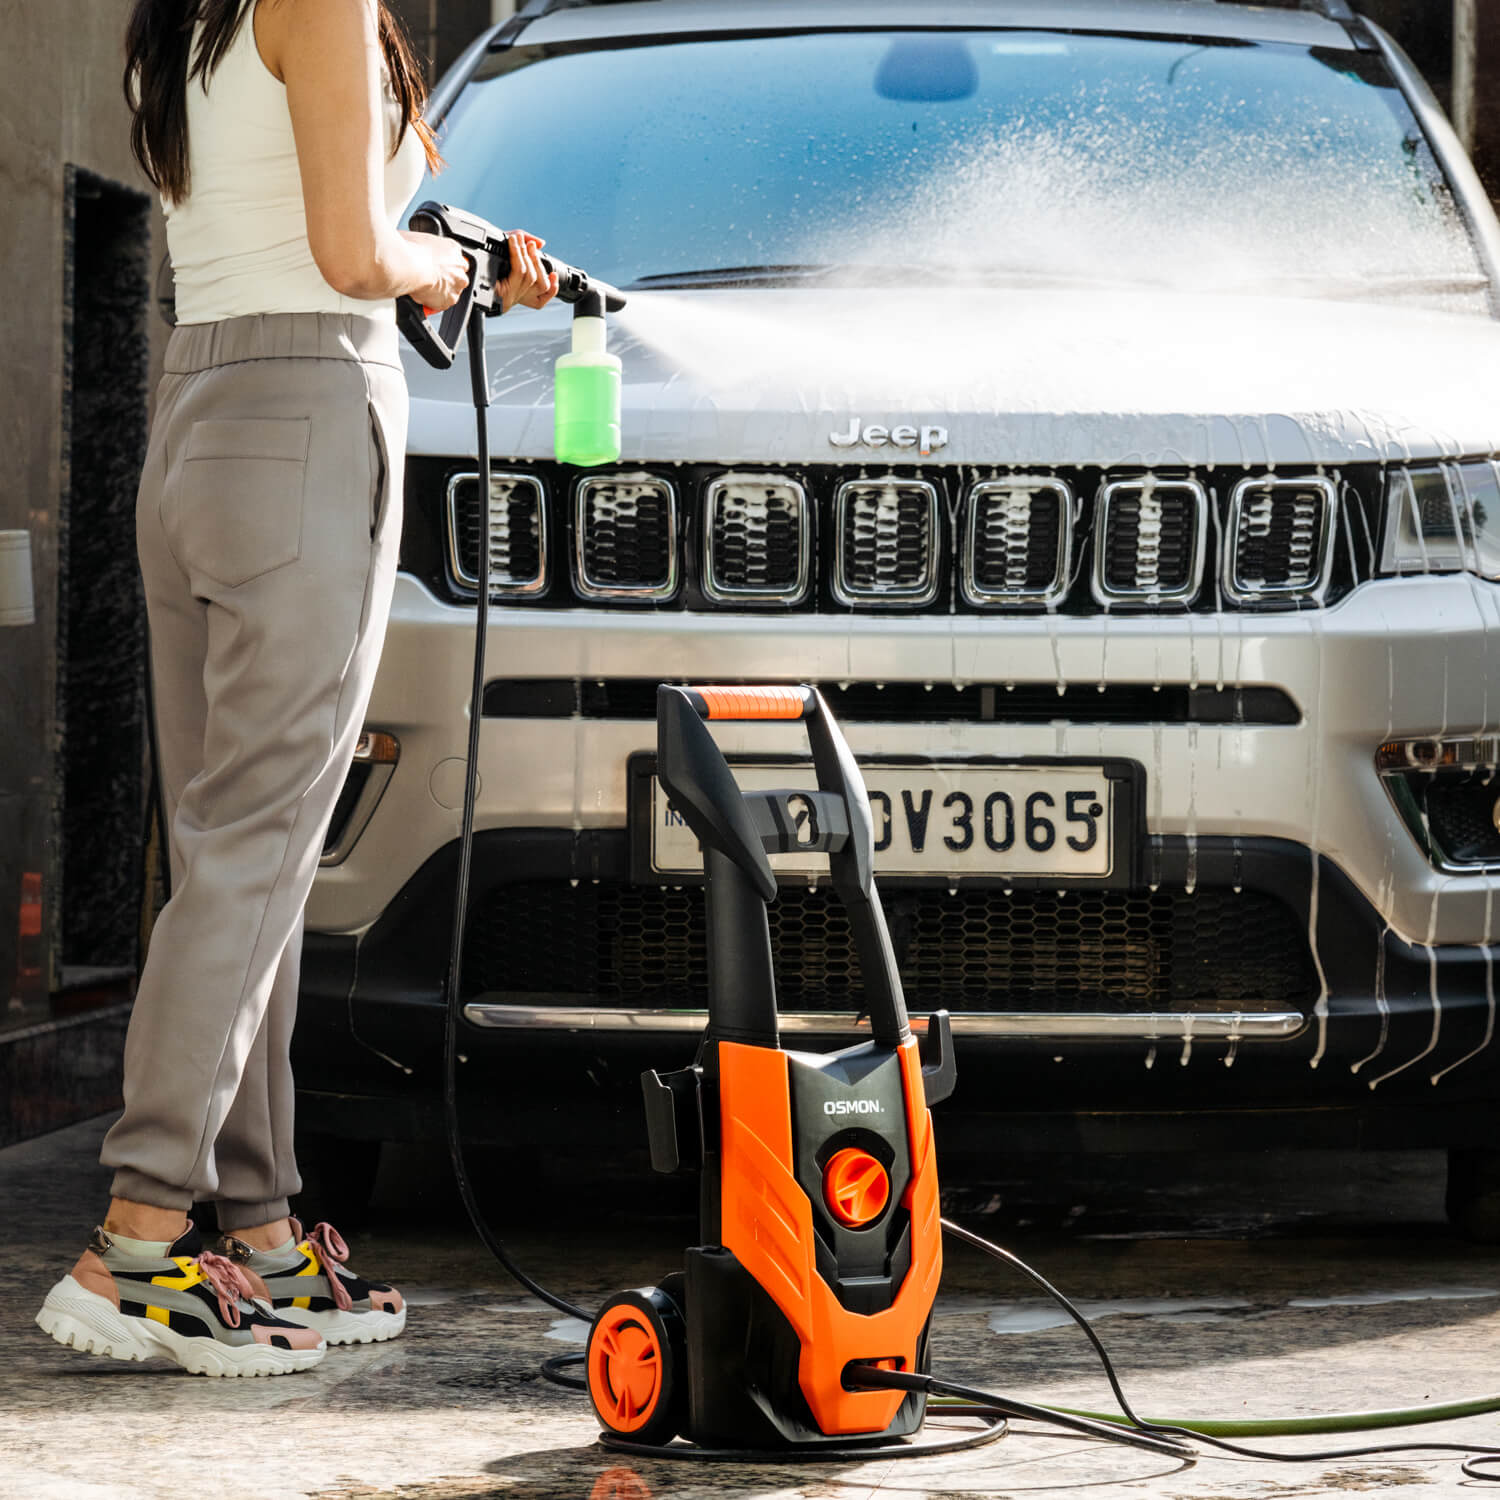 The image showcases the OS PW140 pressure washer, a versatile cleaning tool uses for cleaning a Jeep Compass Car